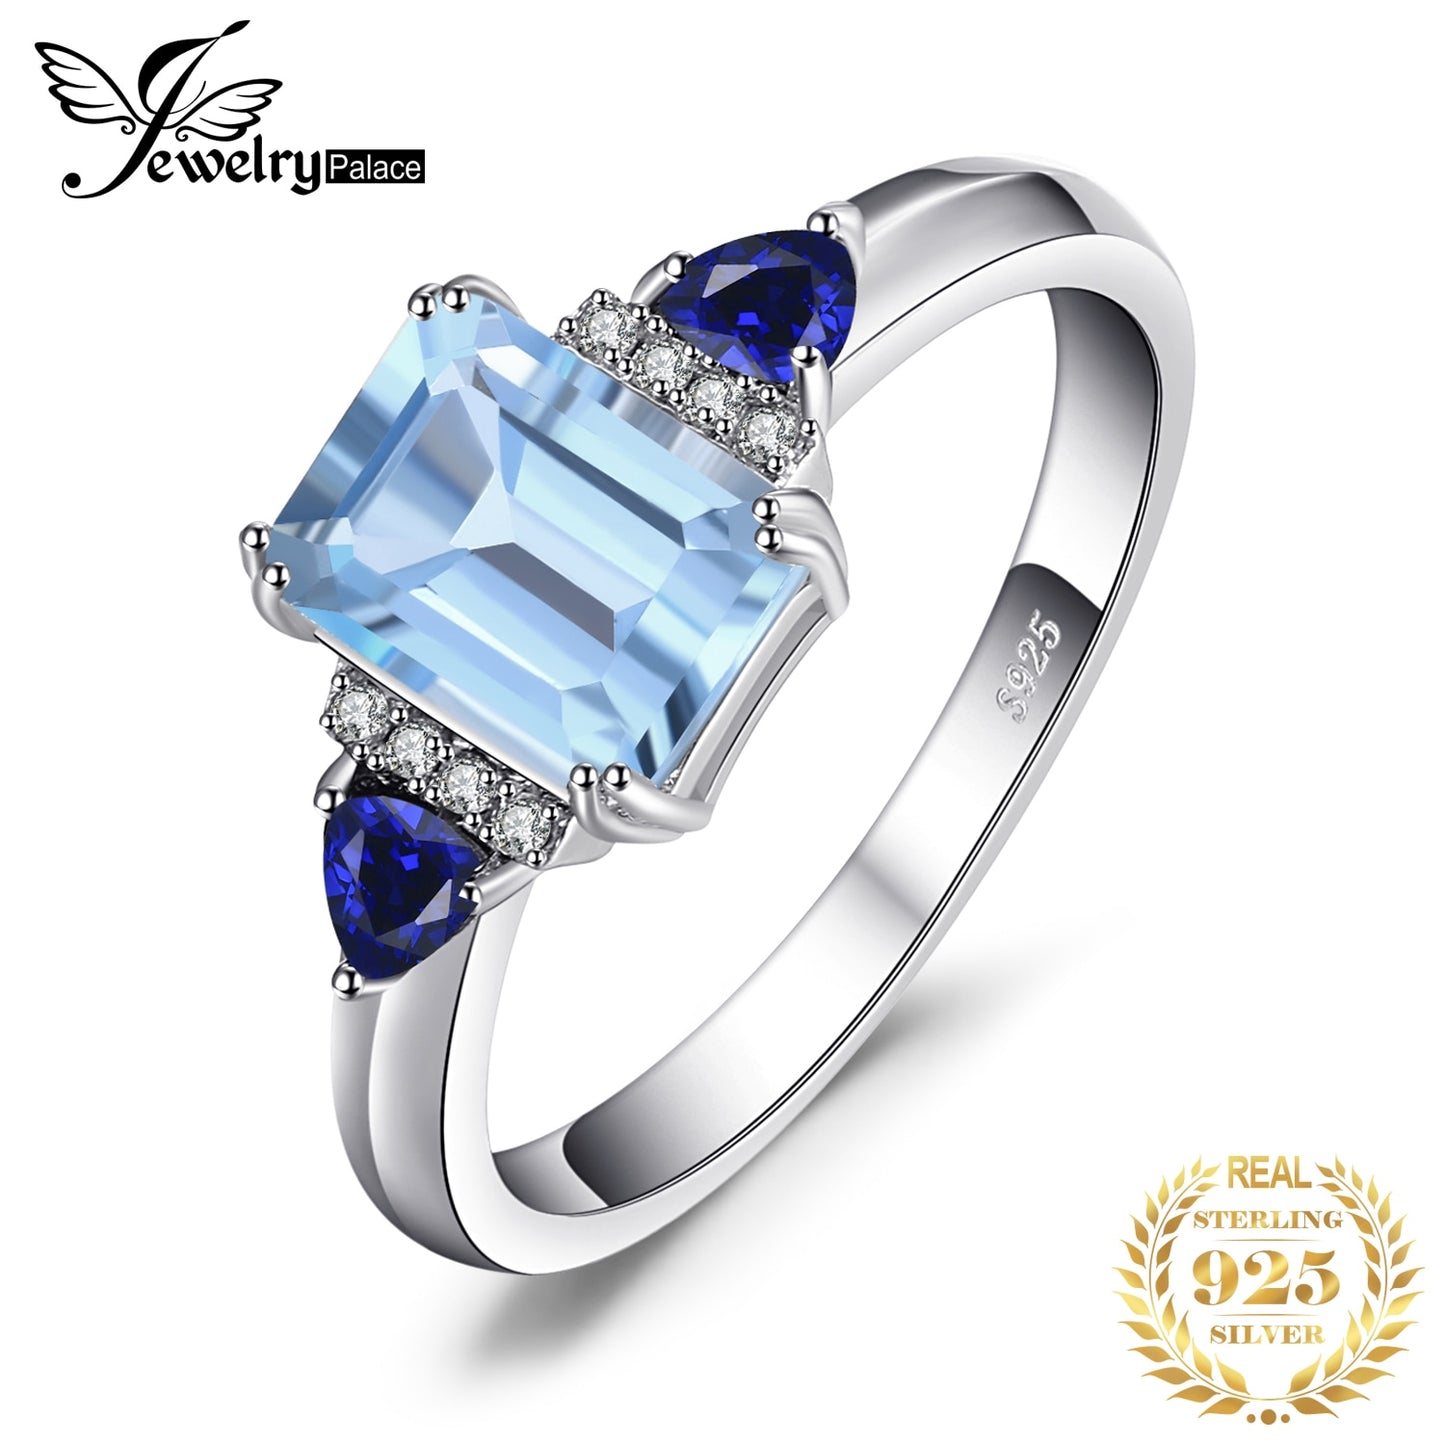 JewelryPalace 1.9ct Sky Blue Topaz Created Sapphire 925 Sterling Silver 3 Stone Ring for Woman Fashion Gemstone Jewelry Gift